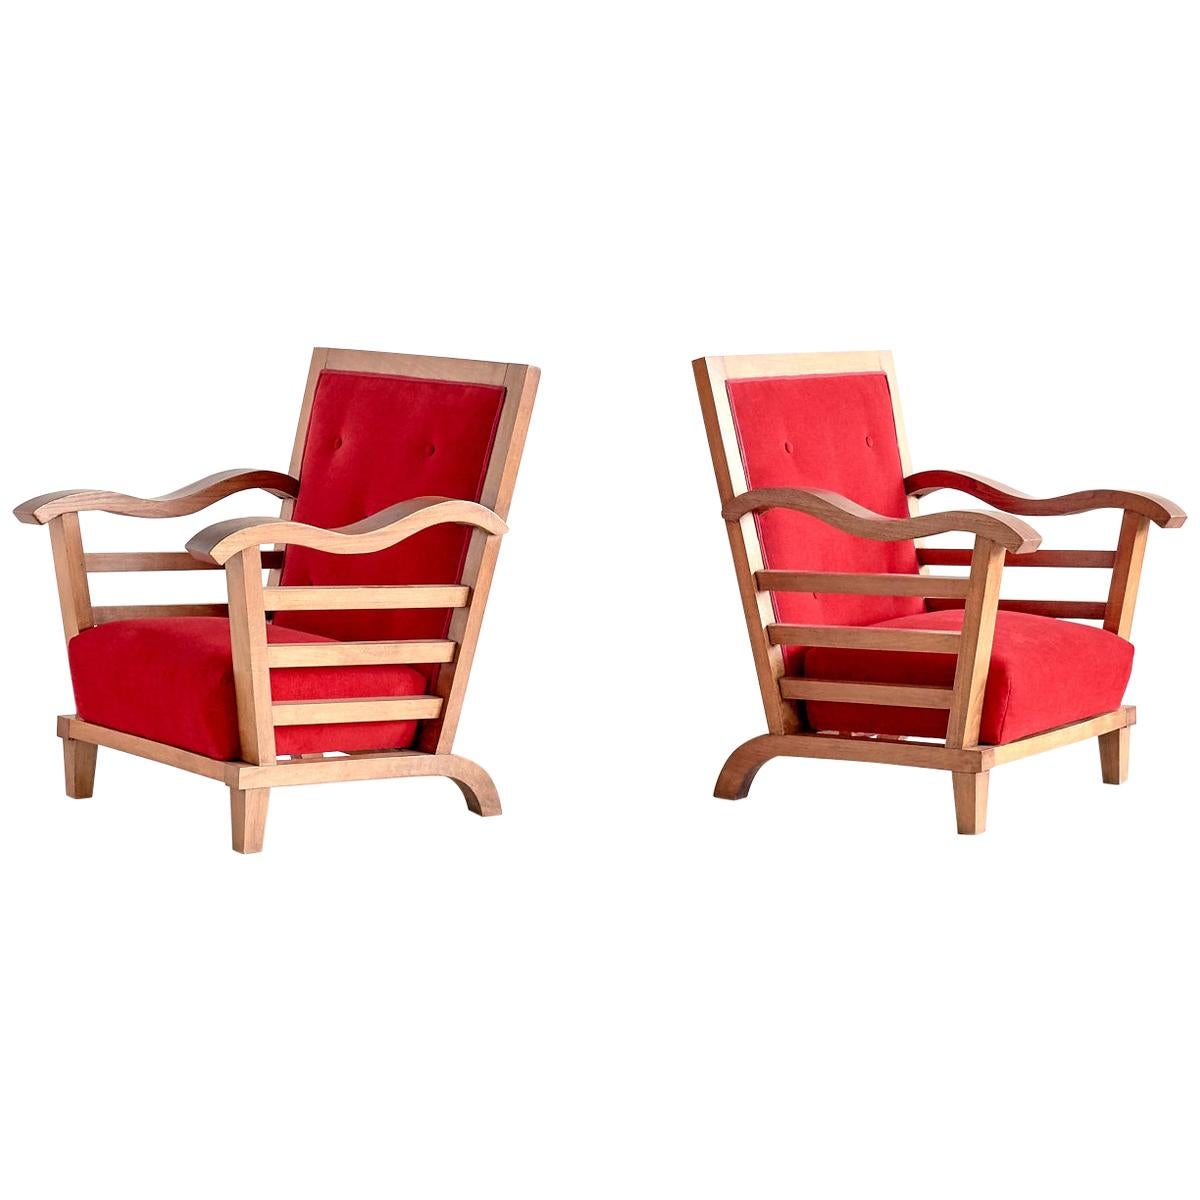 Marguerite Dubuisson Pair of Armchairs in Oak and Elm, France, 1947 For Sale